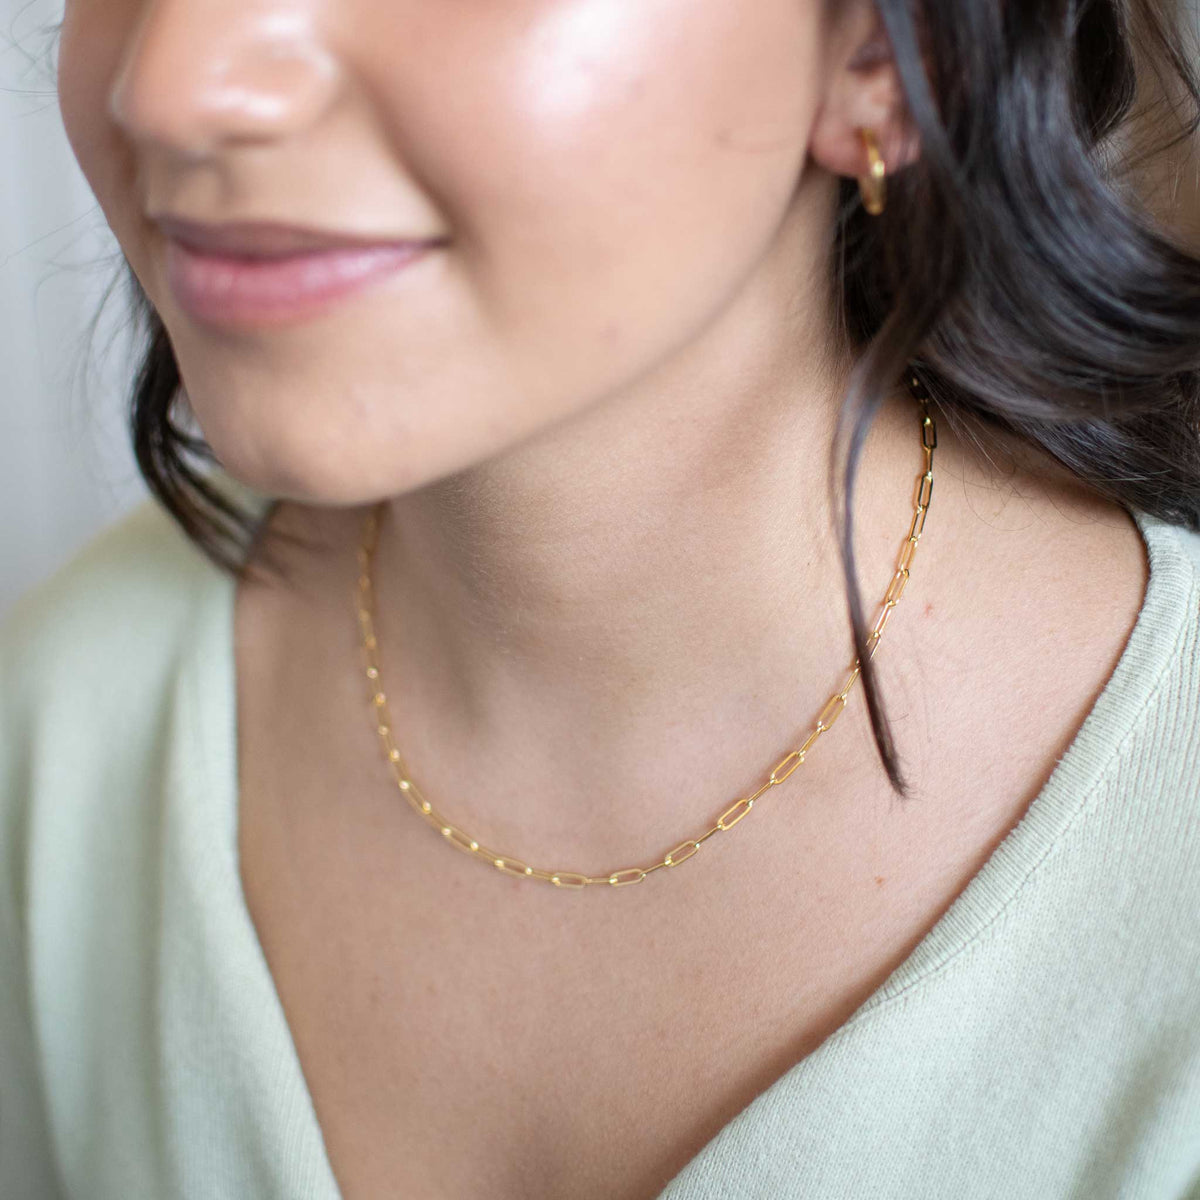 The bold link necklace worn by a woman.